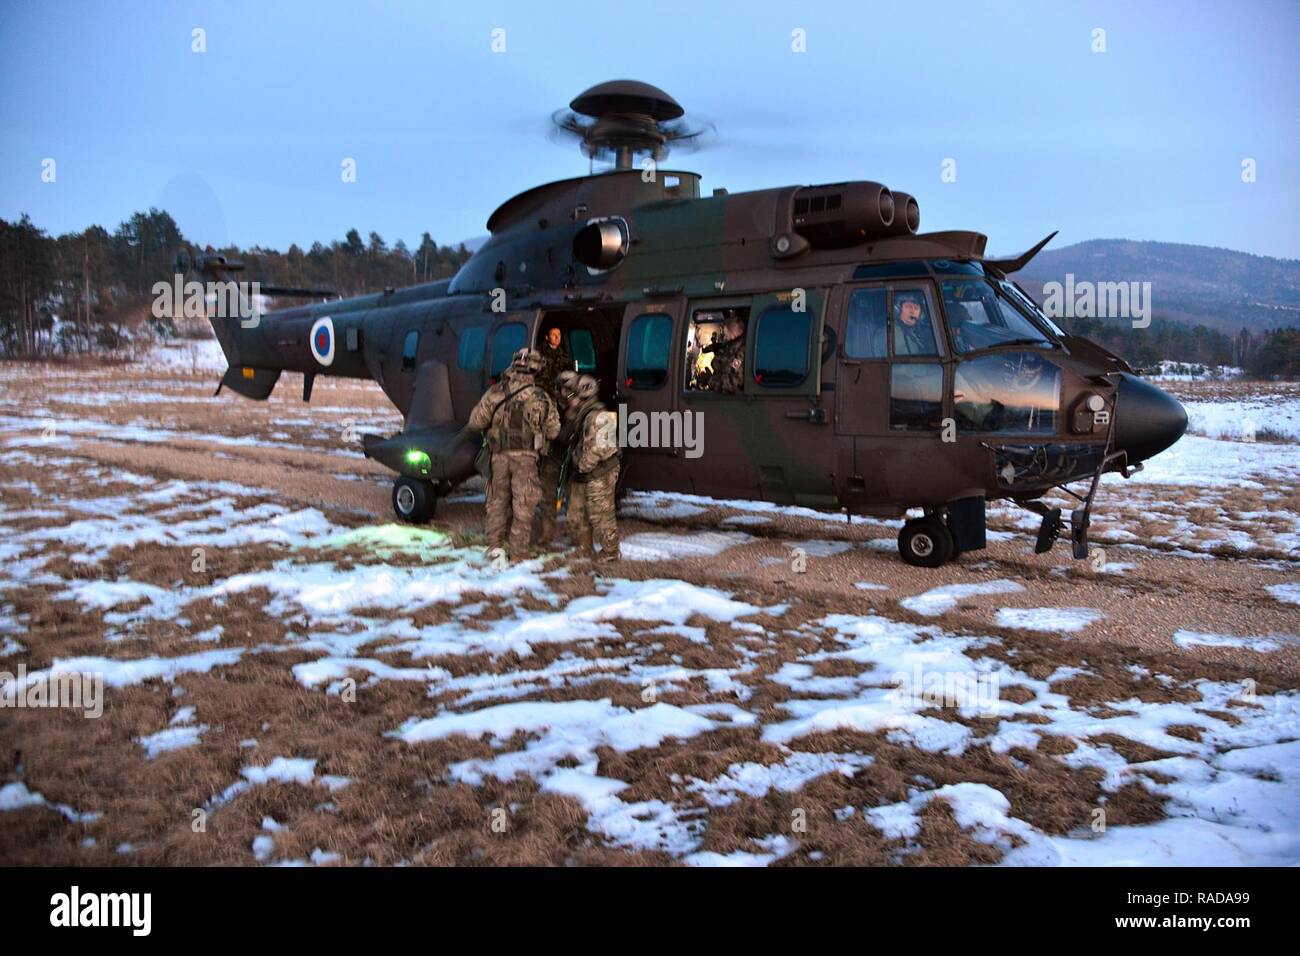 U.S. Army paratroopers from the 173rd Brigade Support Battalion, 173rd Airborne Brigade, conduct  a simulated casualty carry aboard a Slovenian Air Force Eurocopter H3-72, during a casualty evacuation training during exercise Lipizzaner III in Pocek, Slovenia, Jan. 28, 2017. Lipizzaner is a combined squad-level training exercise in preparation for platoon evaluation, and to validate battalion-level deployment procedures. Stock Photo